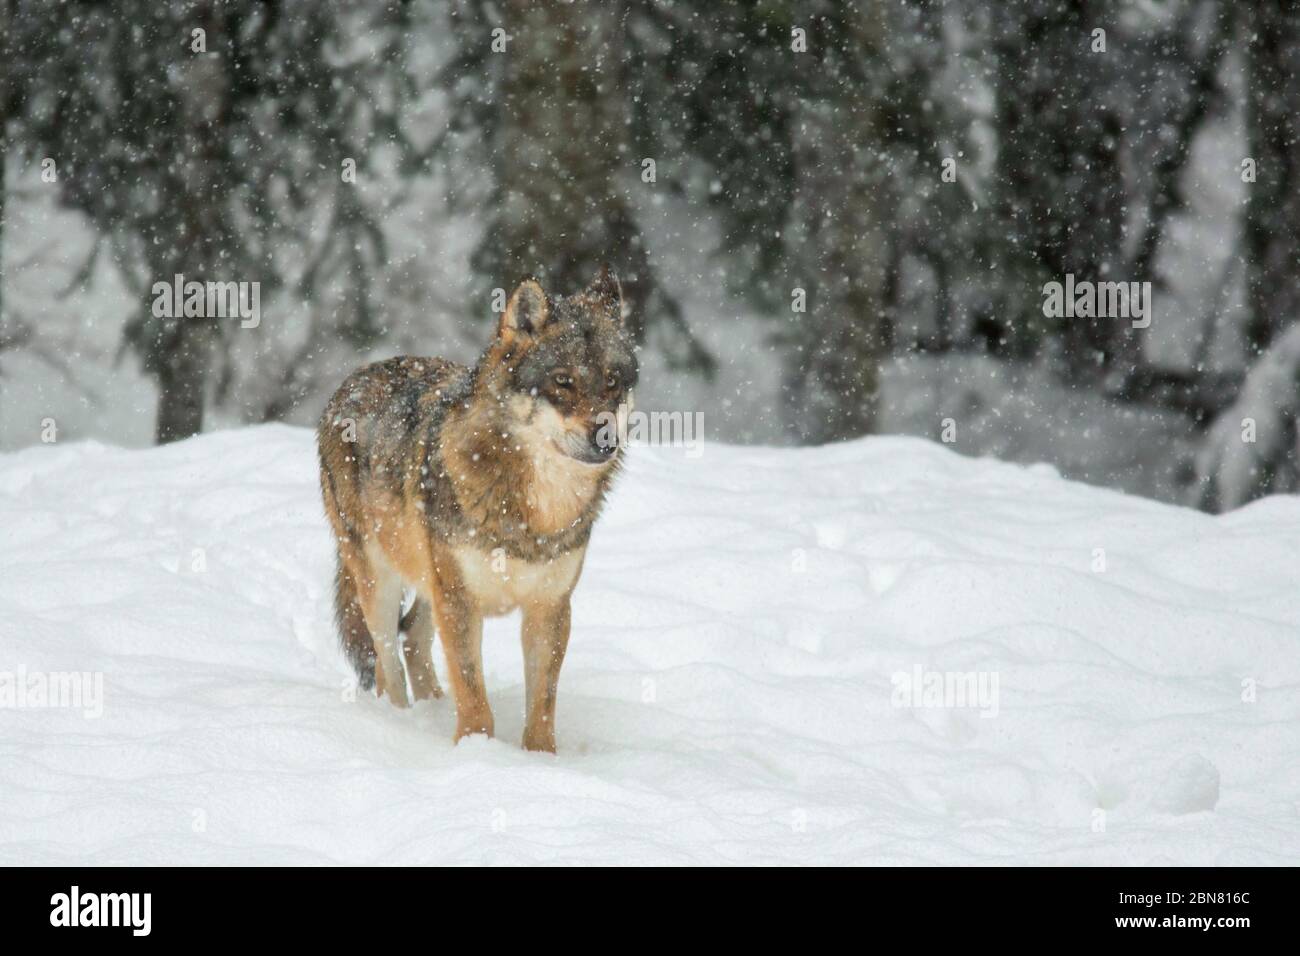 European Wolf - Canis Lupus - on the snow Stock Photo